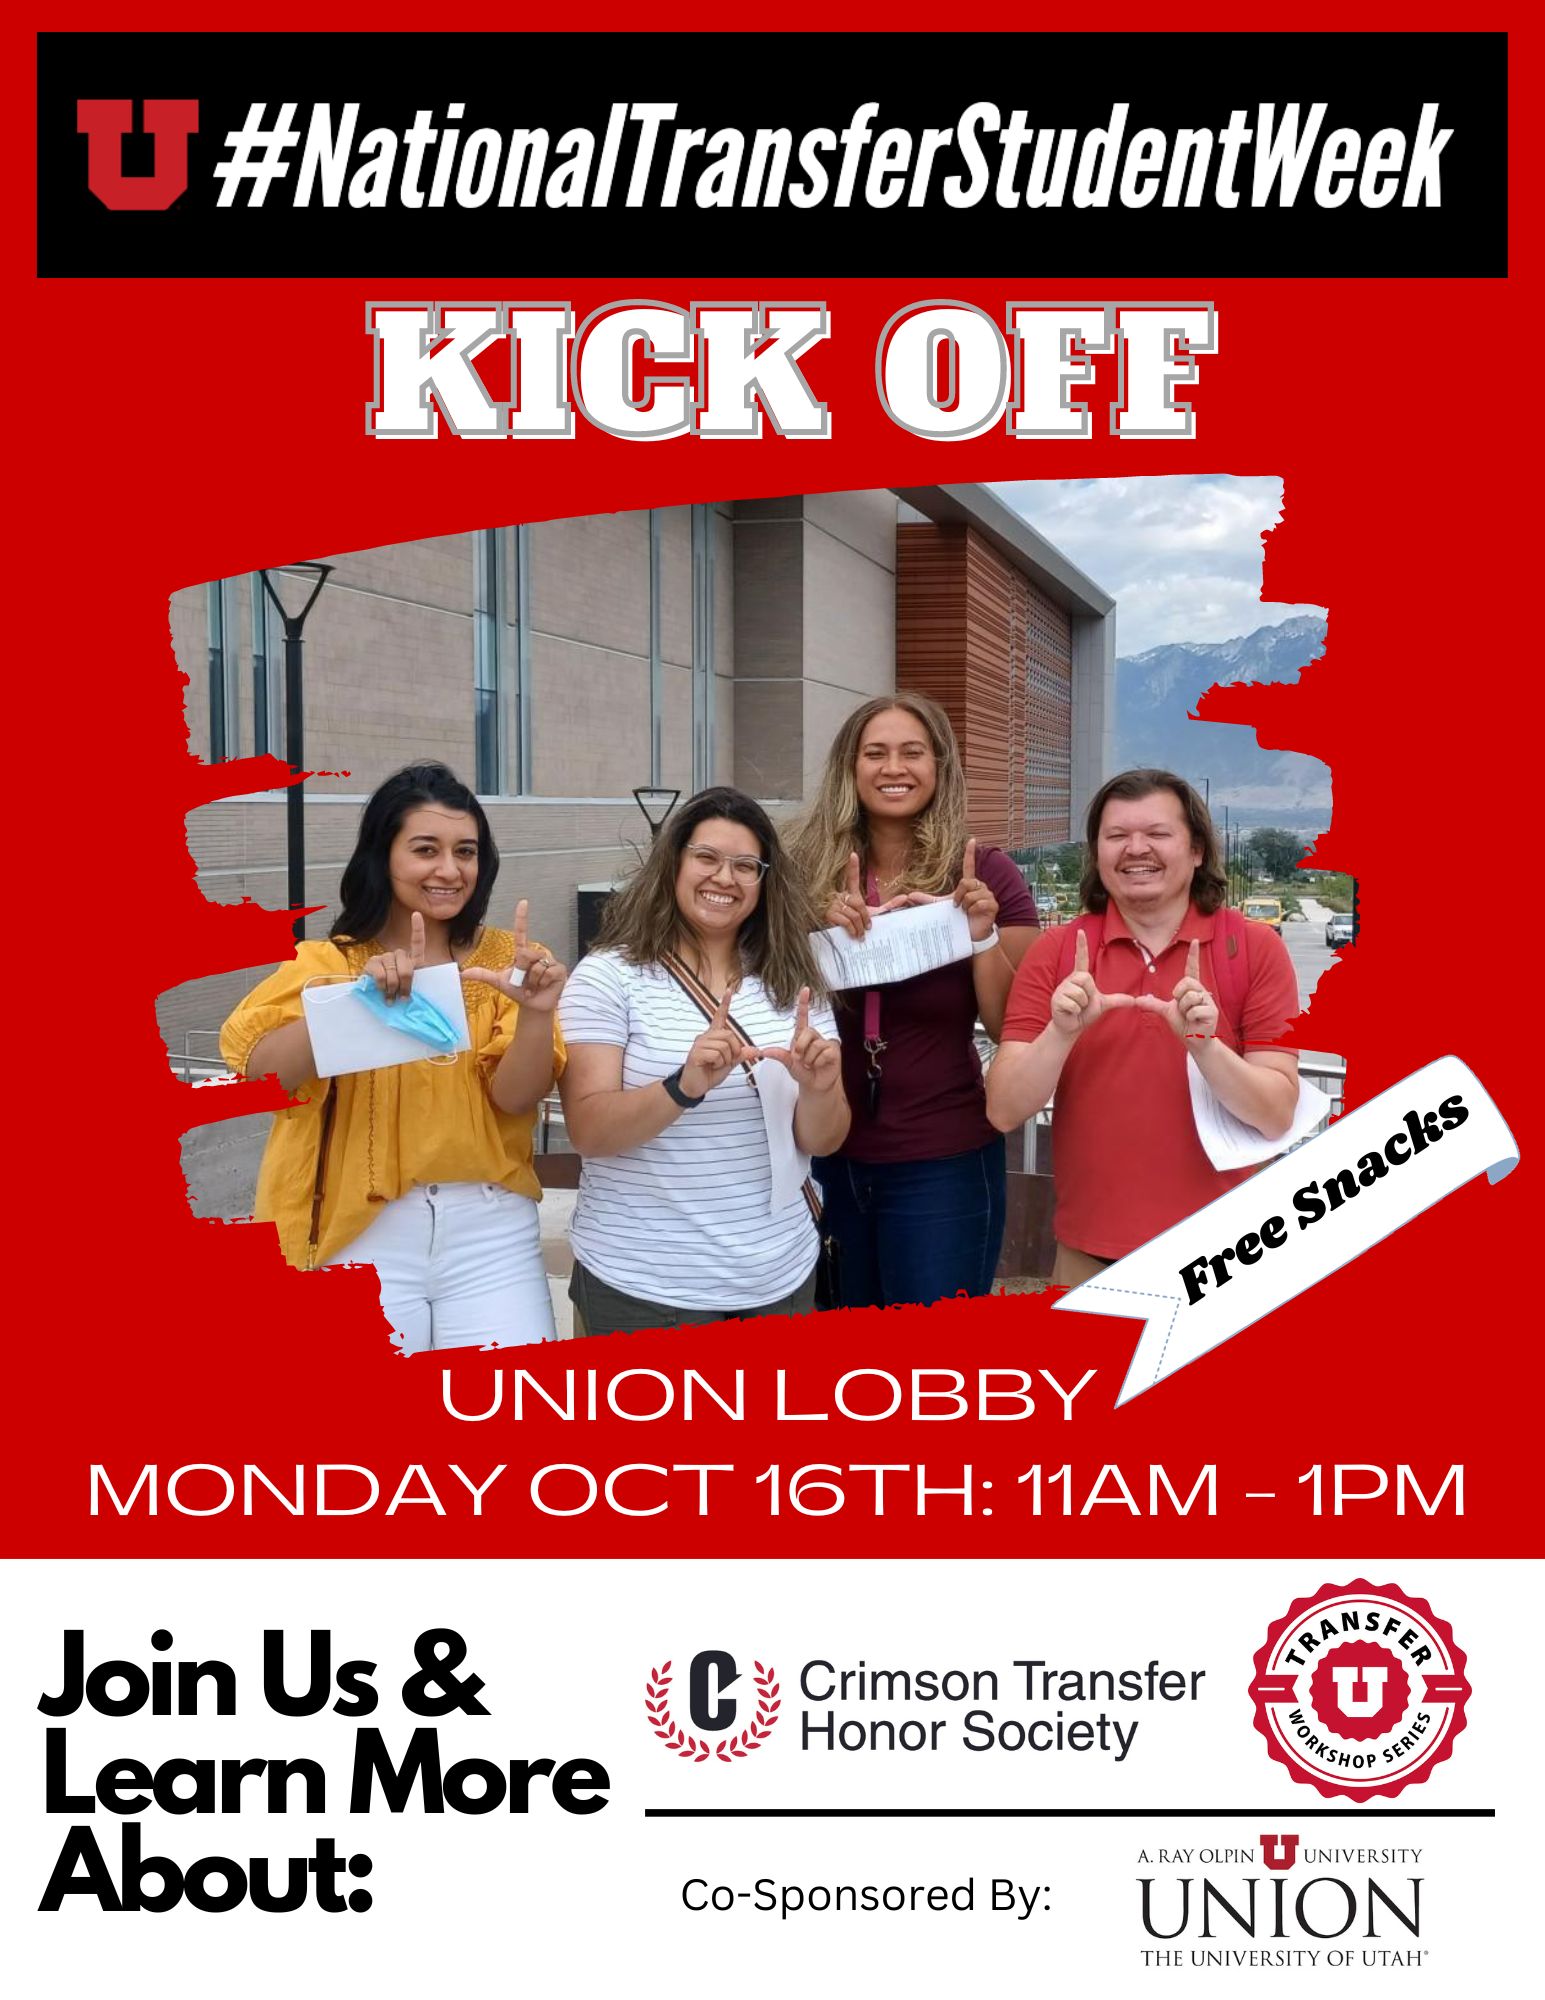 National Transfer Student Week kickoff Union